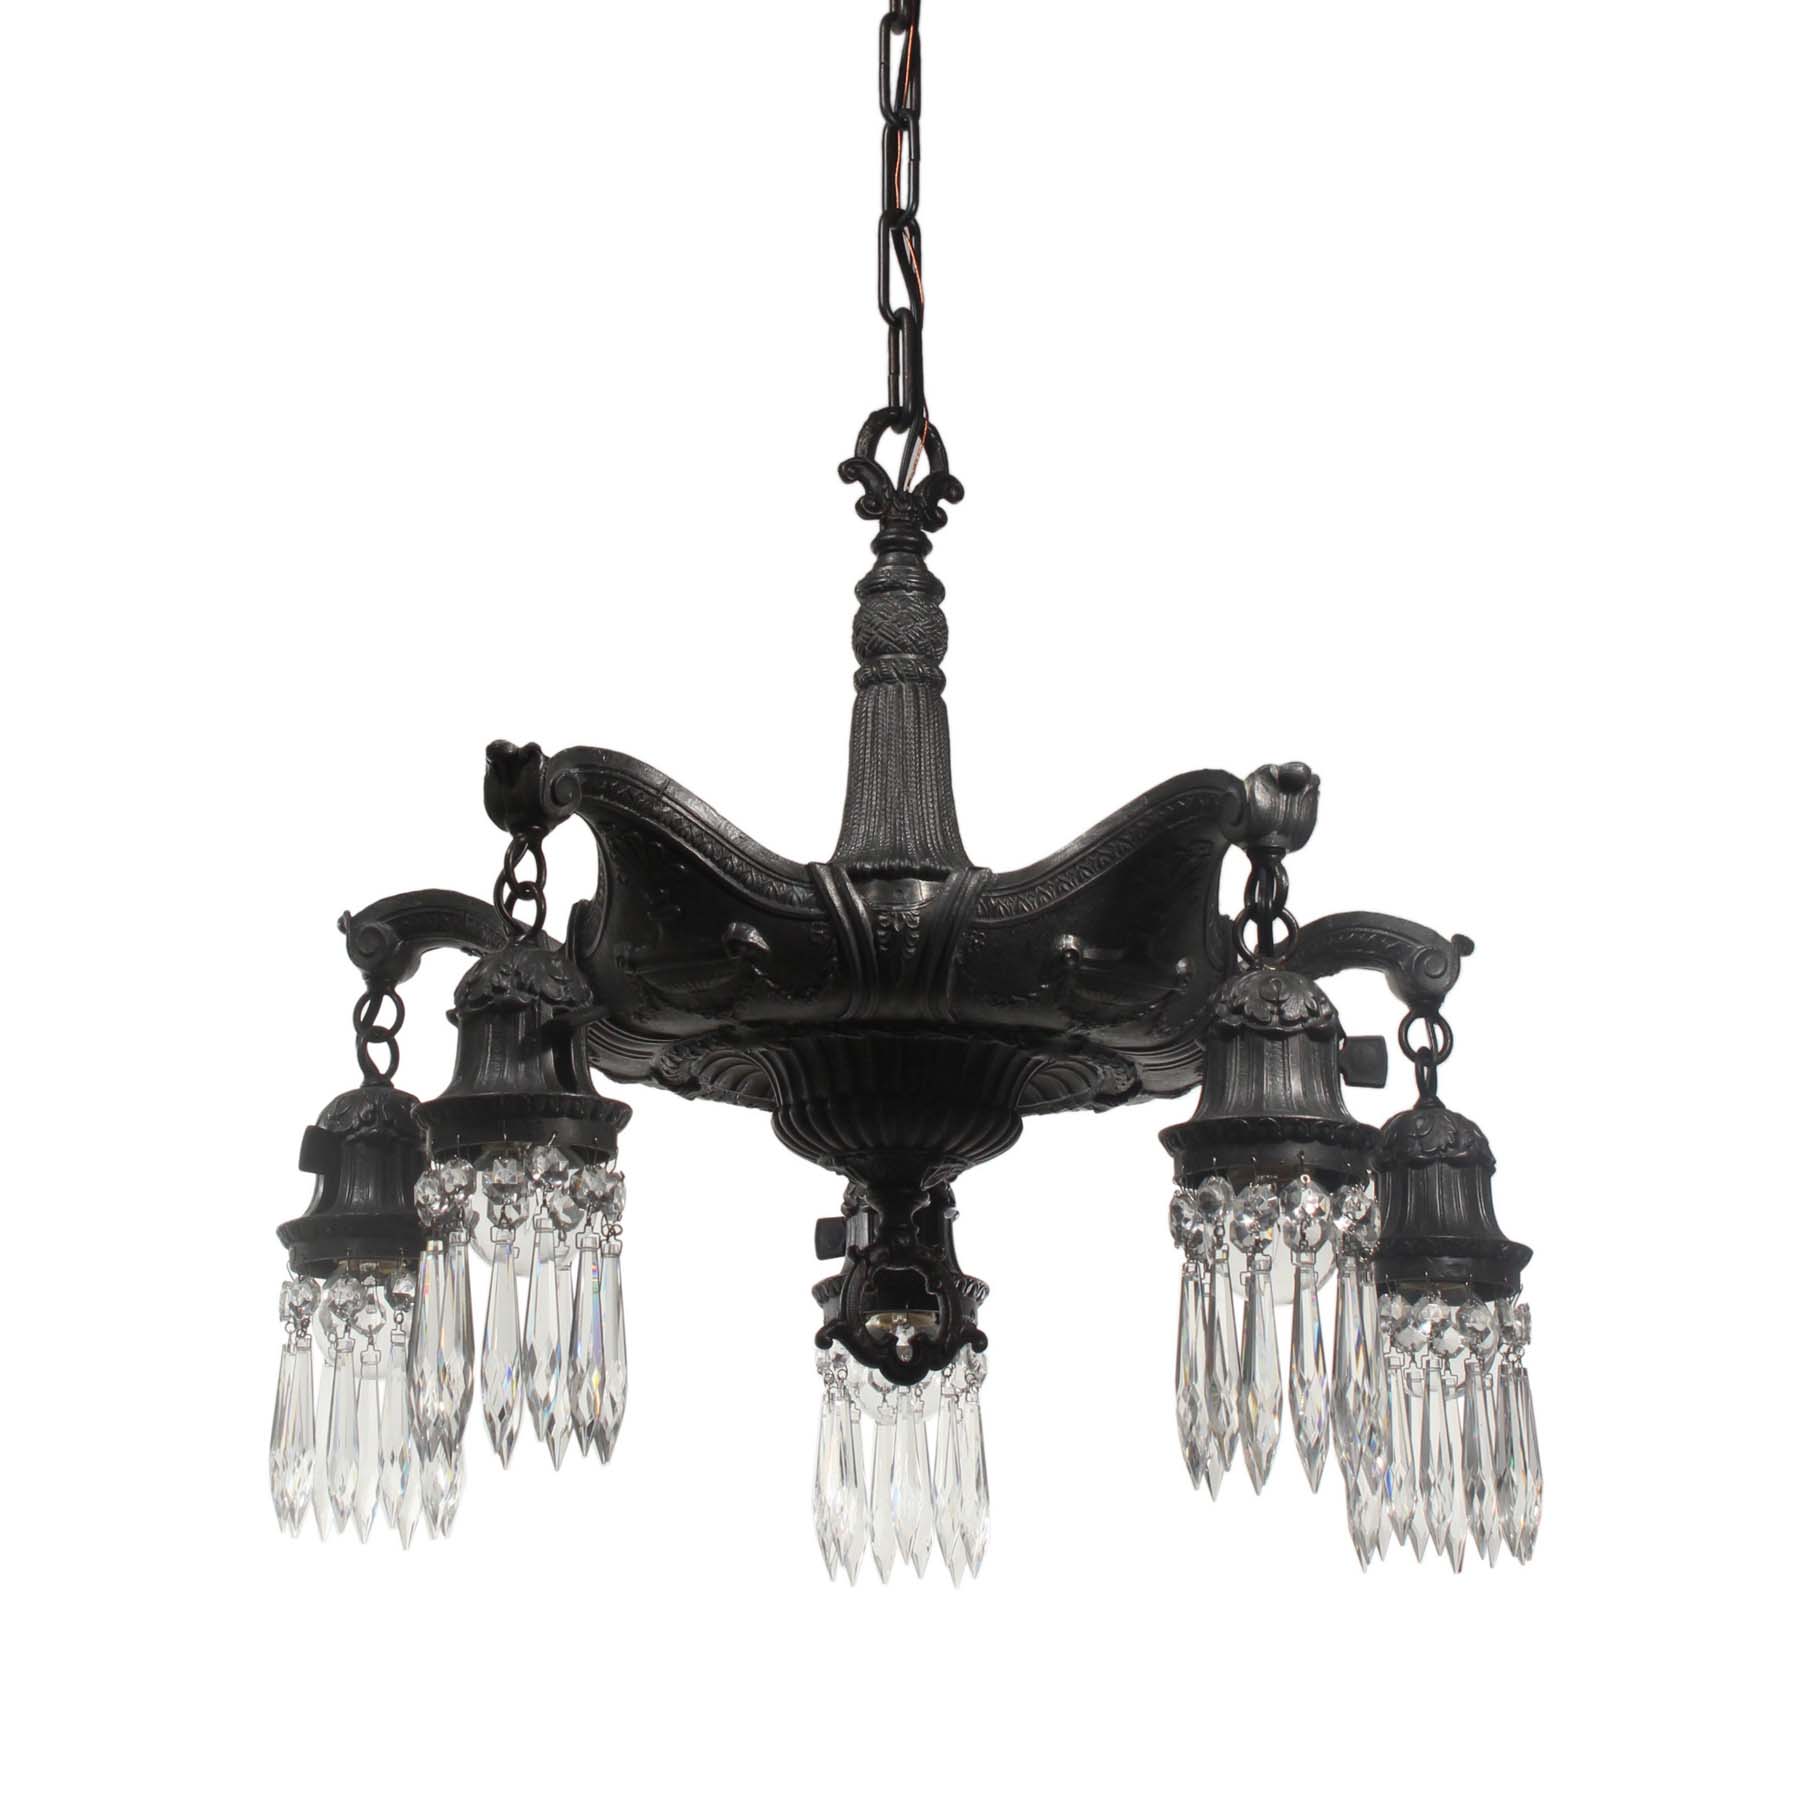 SOLD Antique Figural Neoclassical Chandelier with Prisms, Adam Style-0